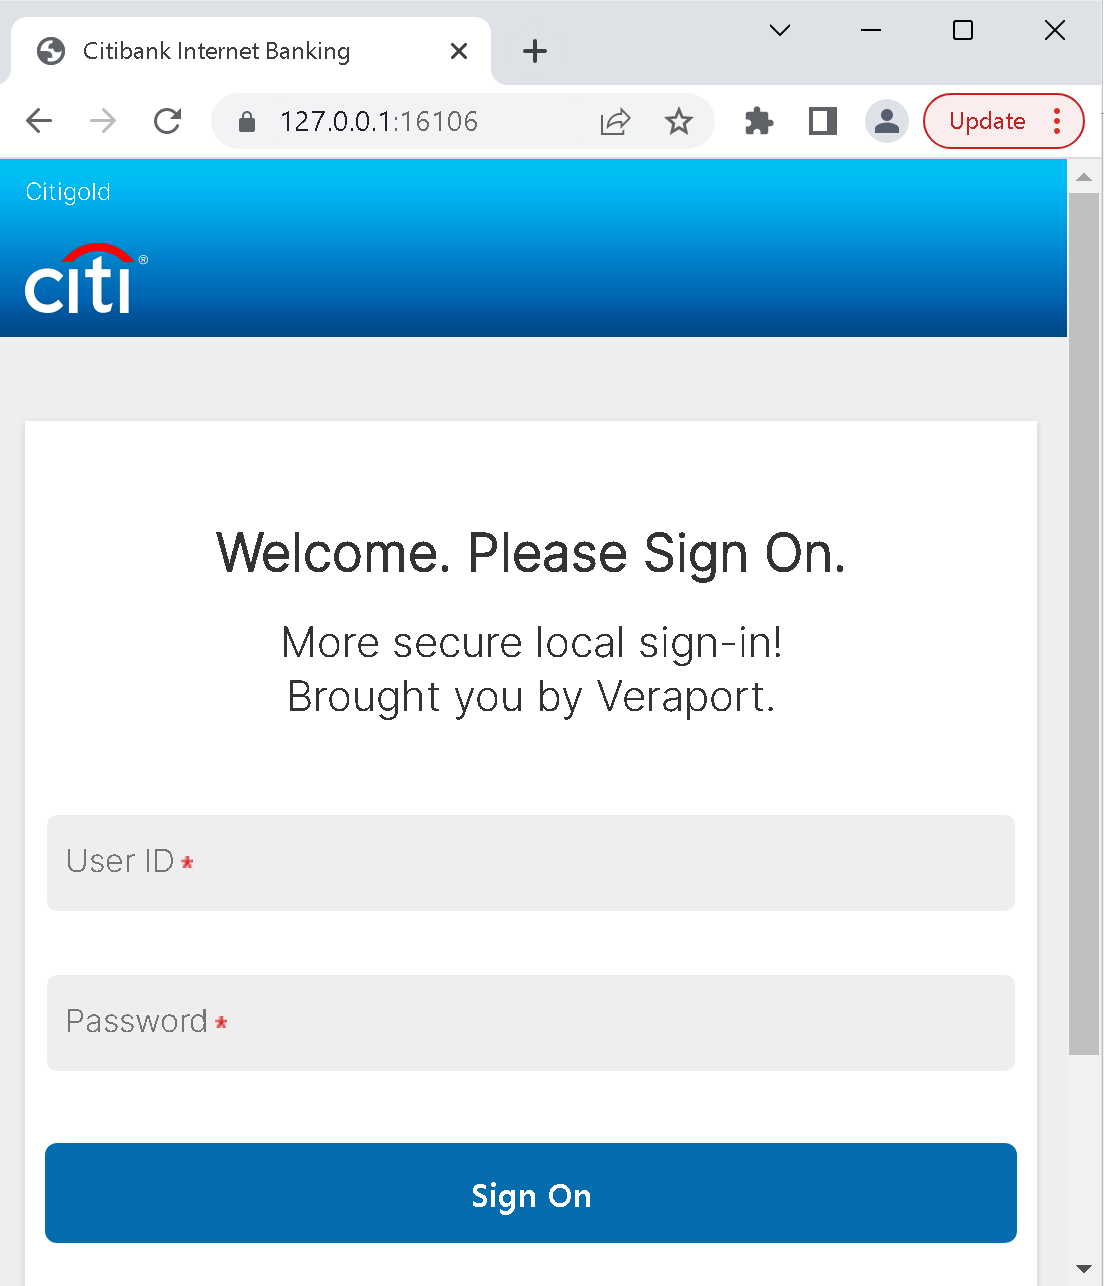 Screenshot of the browser window titled “Citibank Internet Banking” and showing 127.0.0.1:16106 as page address. The page is a login page titled “Welcome. Please Sign On. More secure local sign-in! Brought you by Veraport.”